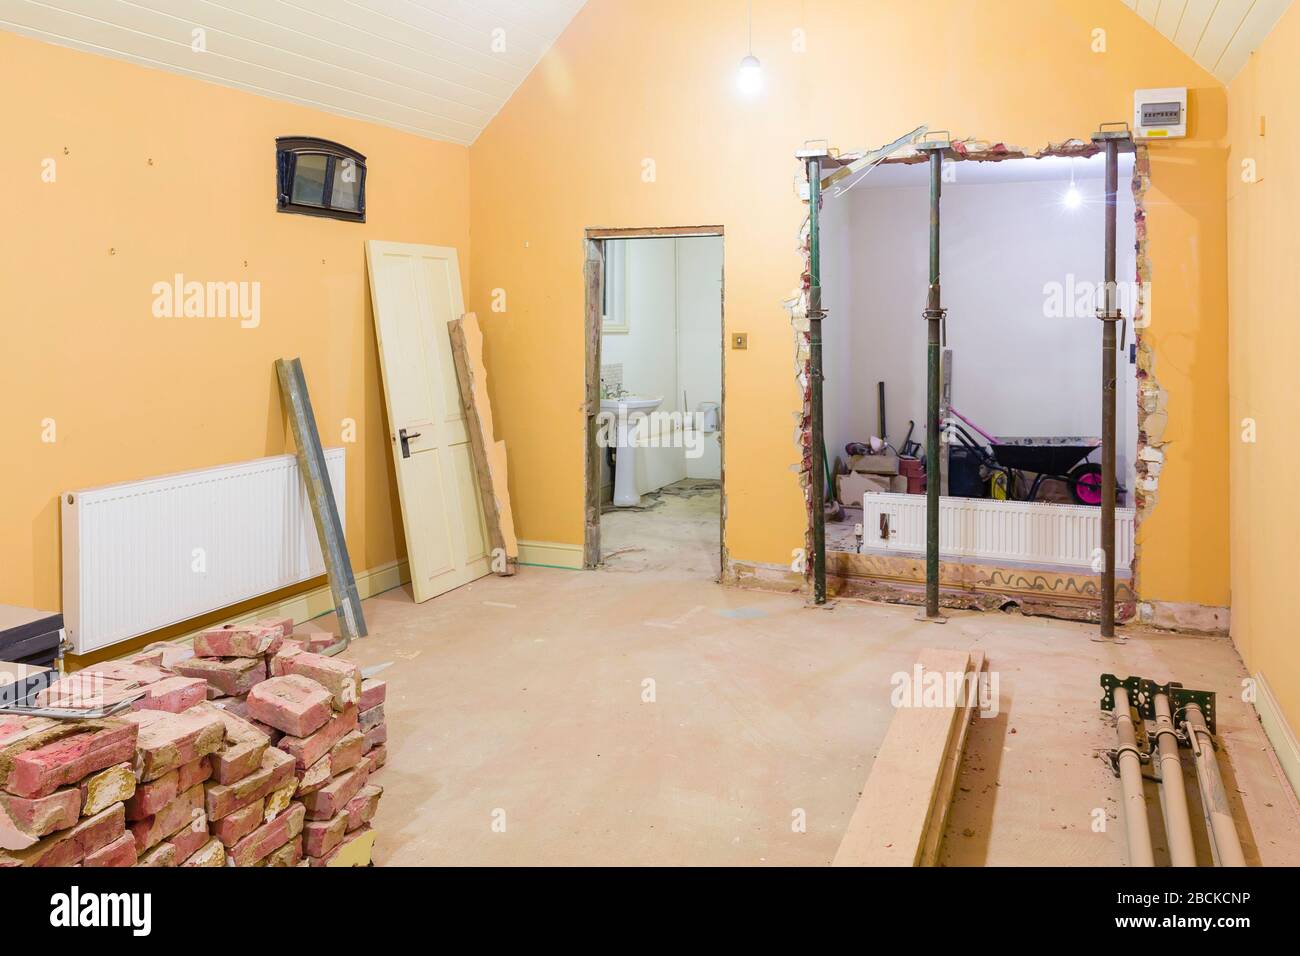 Building work and remodelling of a room interior while renovating a UK house Stock Photo